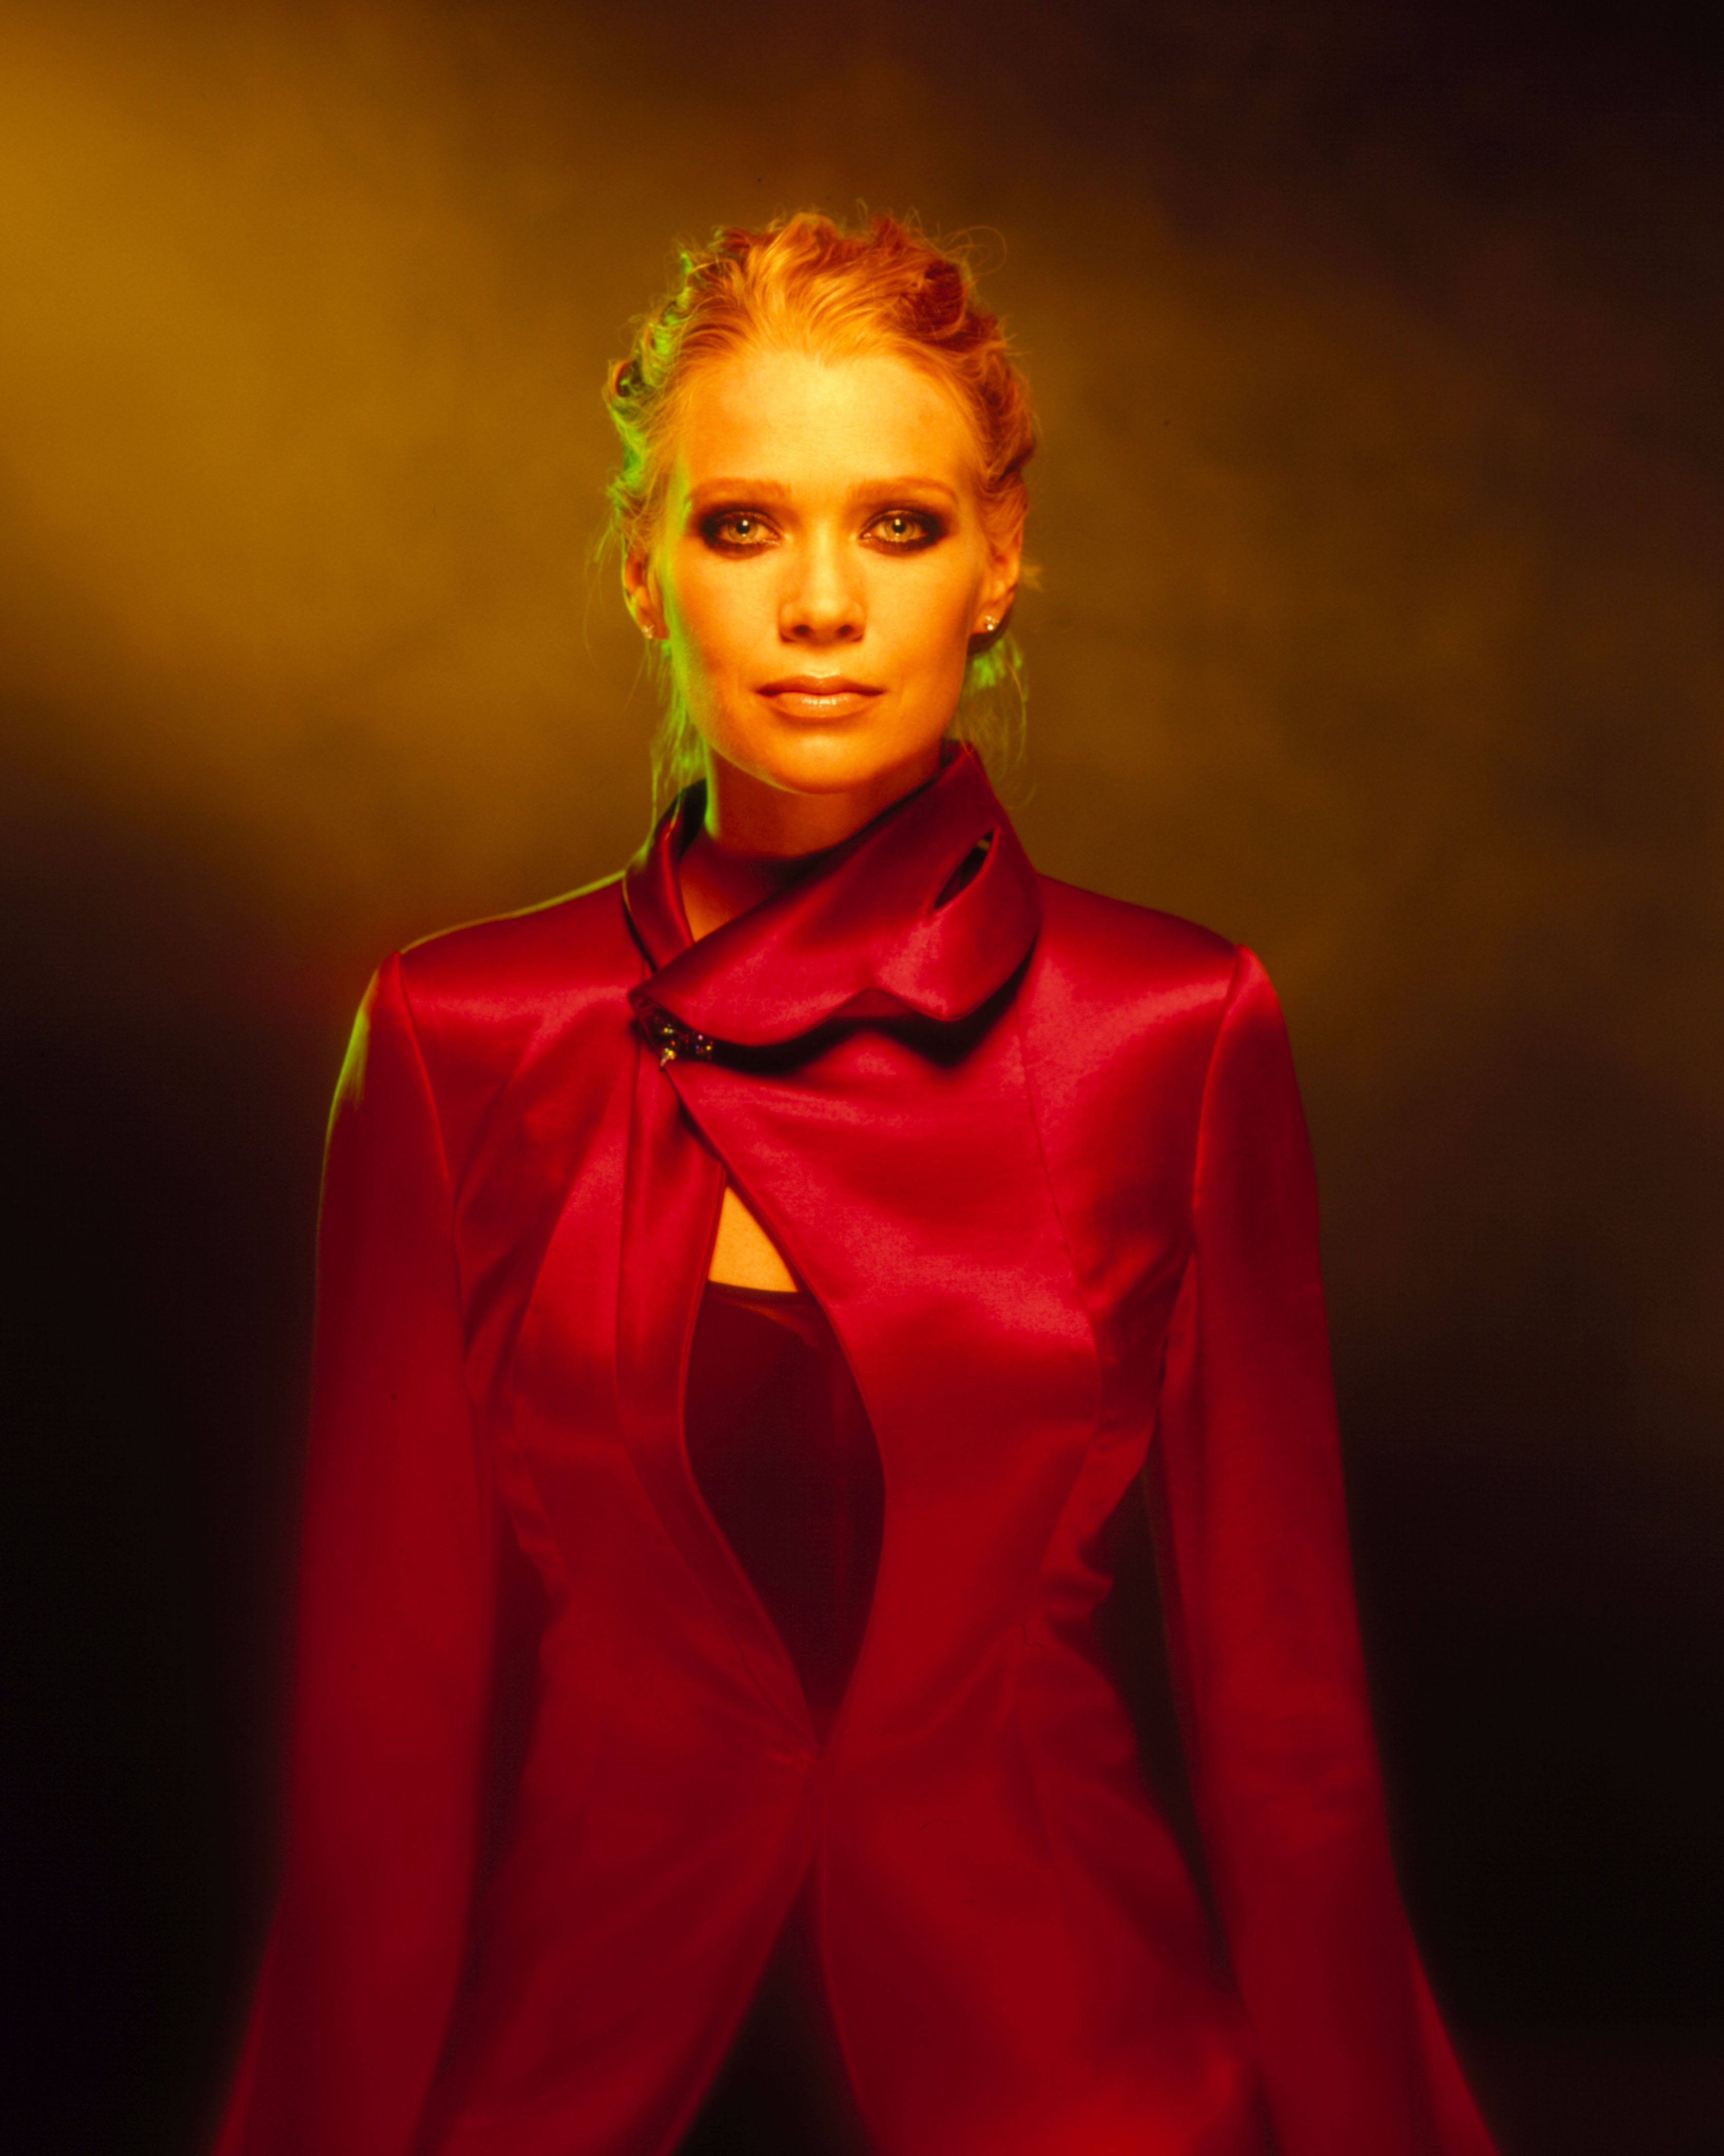 laurie-holden-young